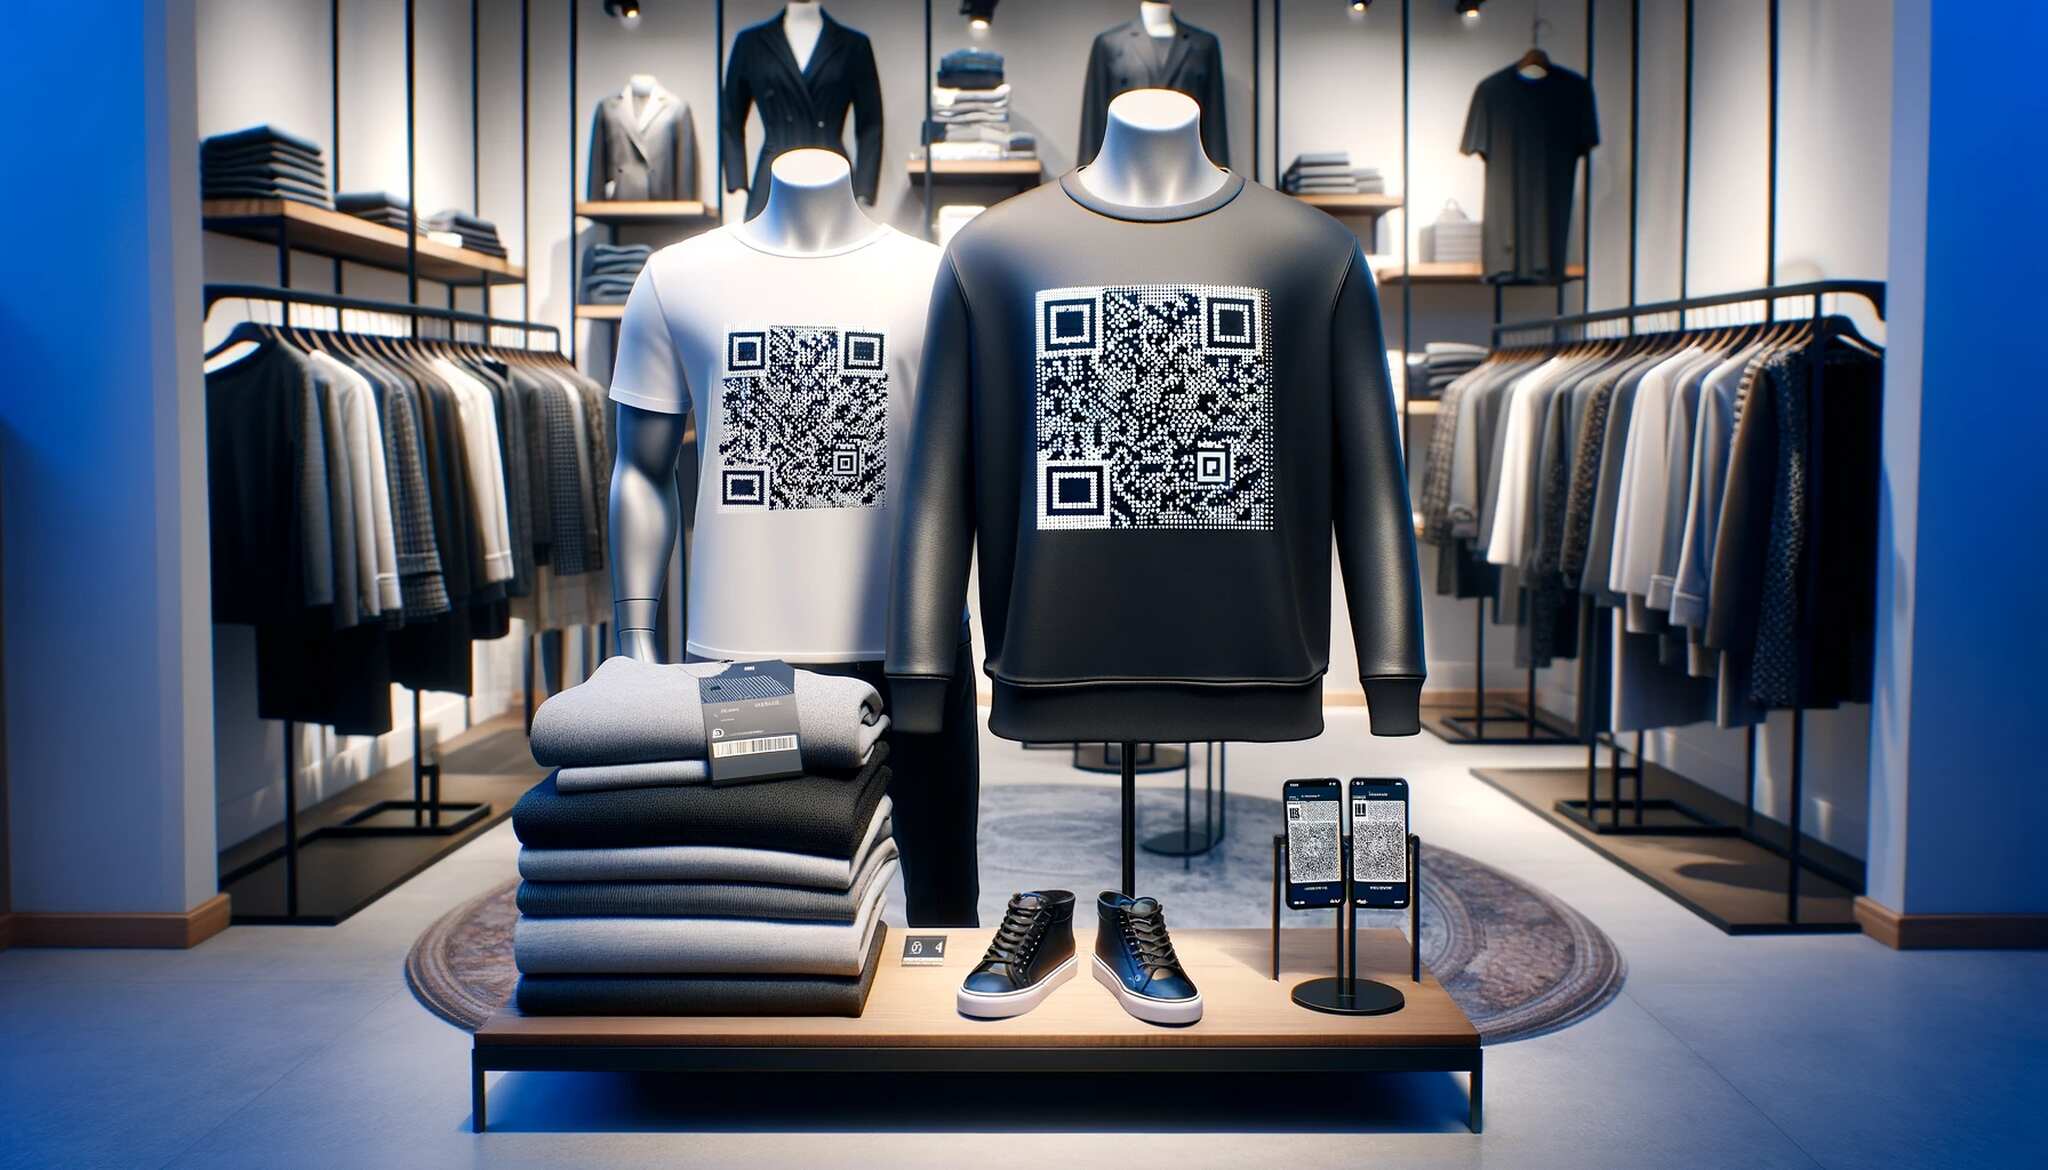 a fashion store display featuring clothing items with QR codes